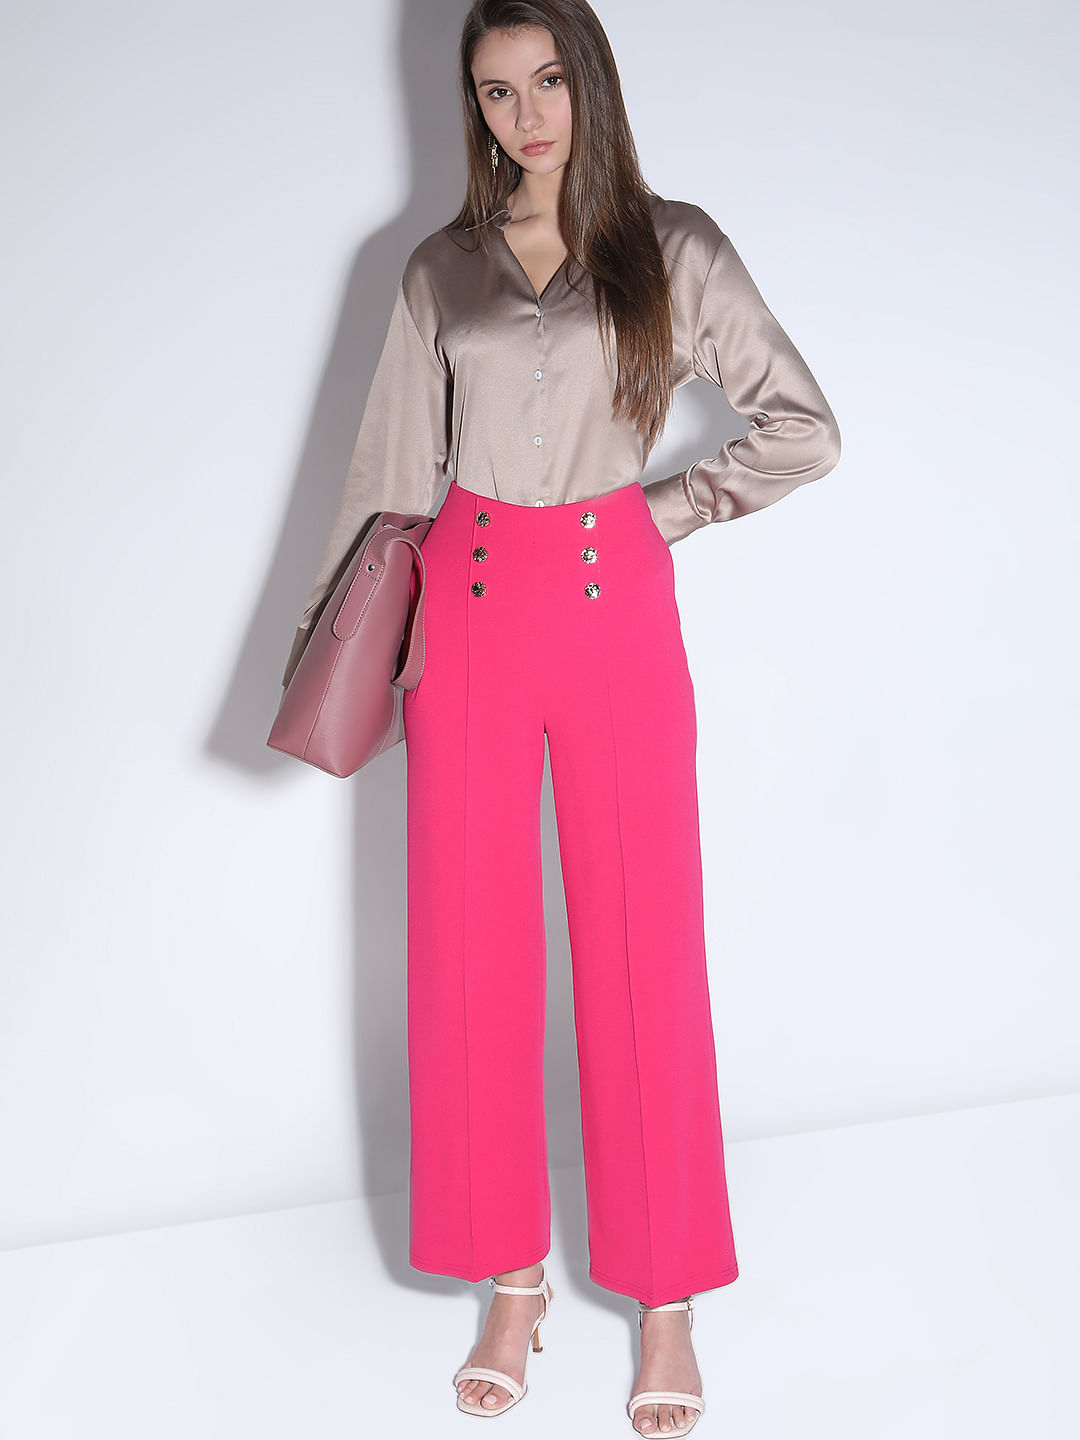 Plus Size Plus Size Bright Pink Pants Online in India | Amydus